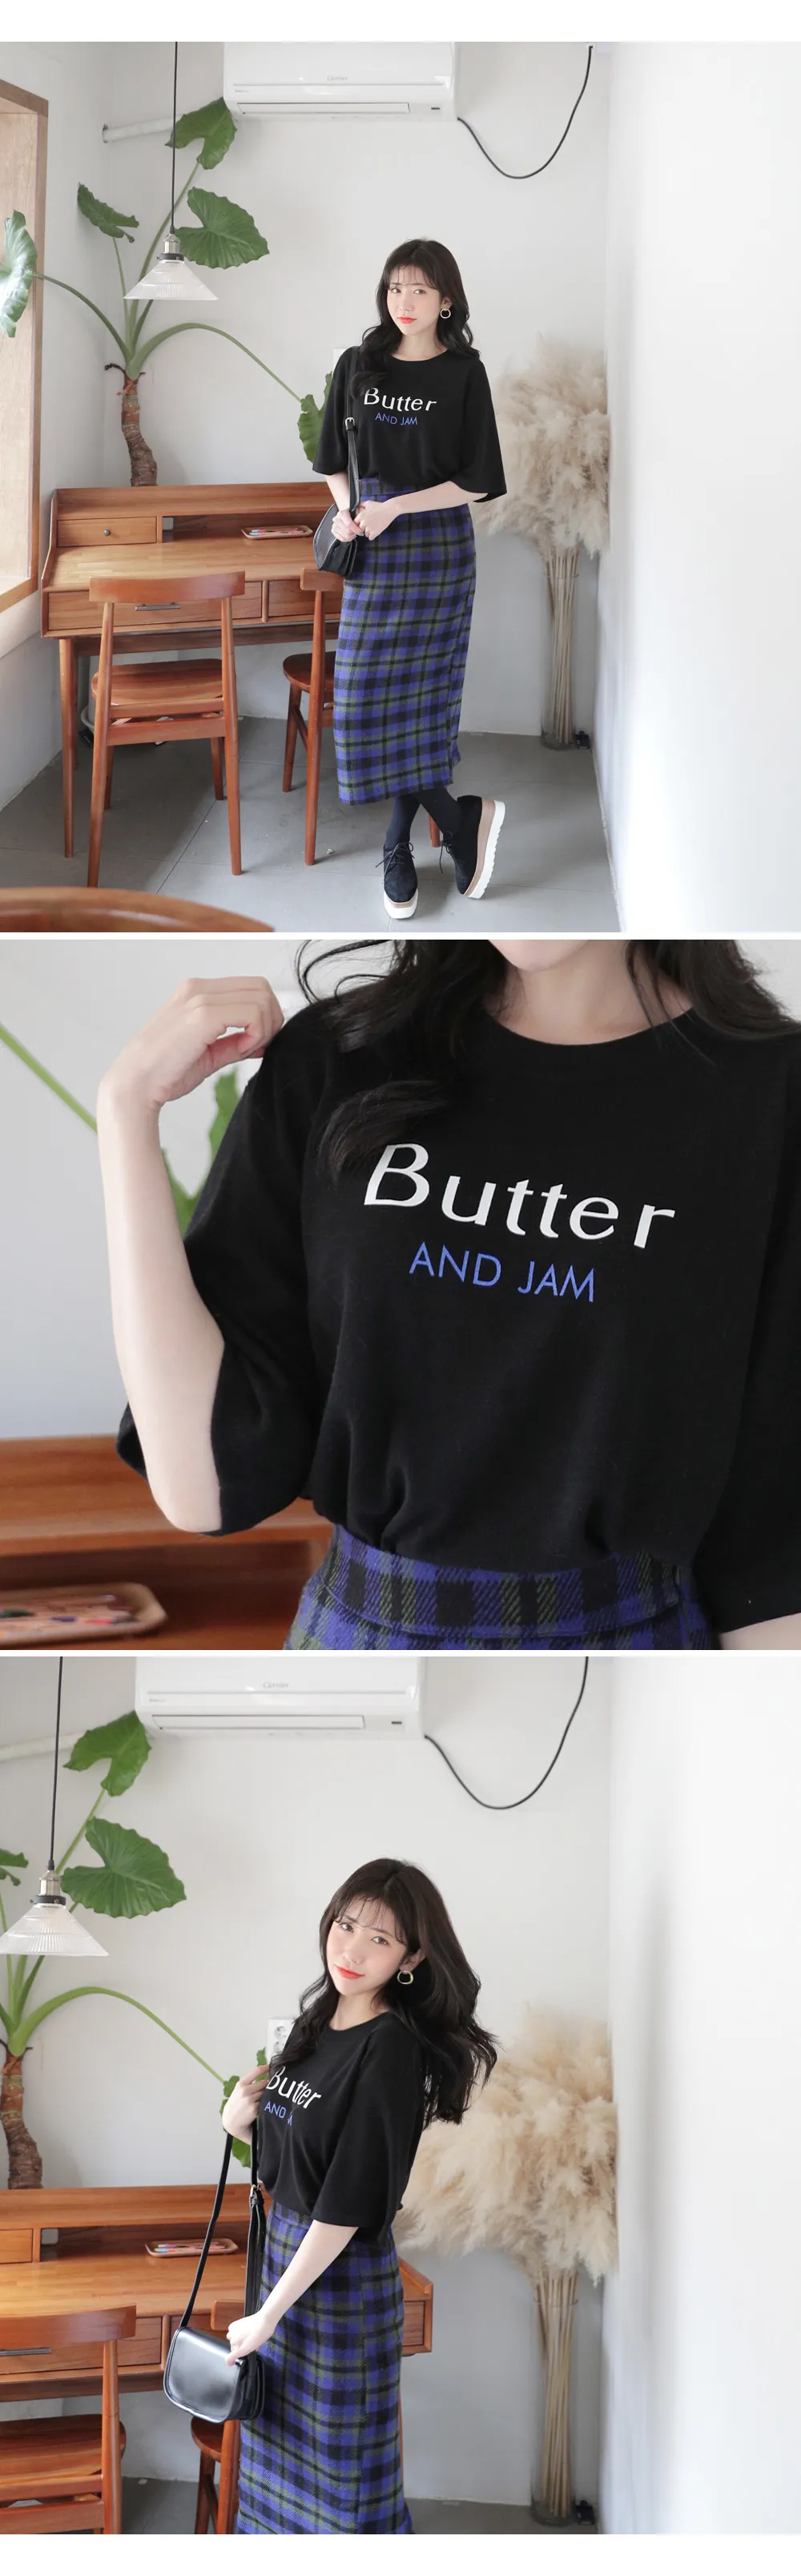 Butter AND JAMルーズTシャツ・全2色 | DHOLIC | 詳細画像6